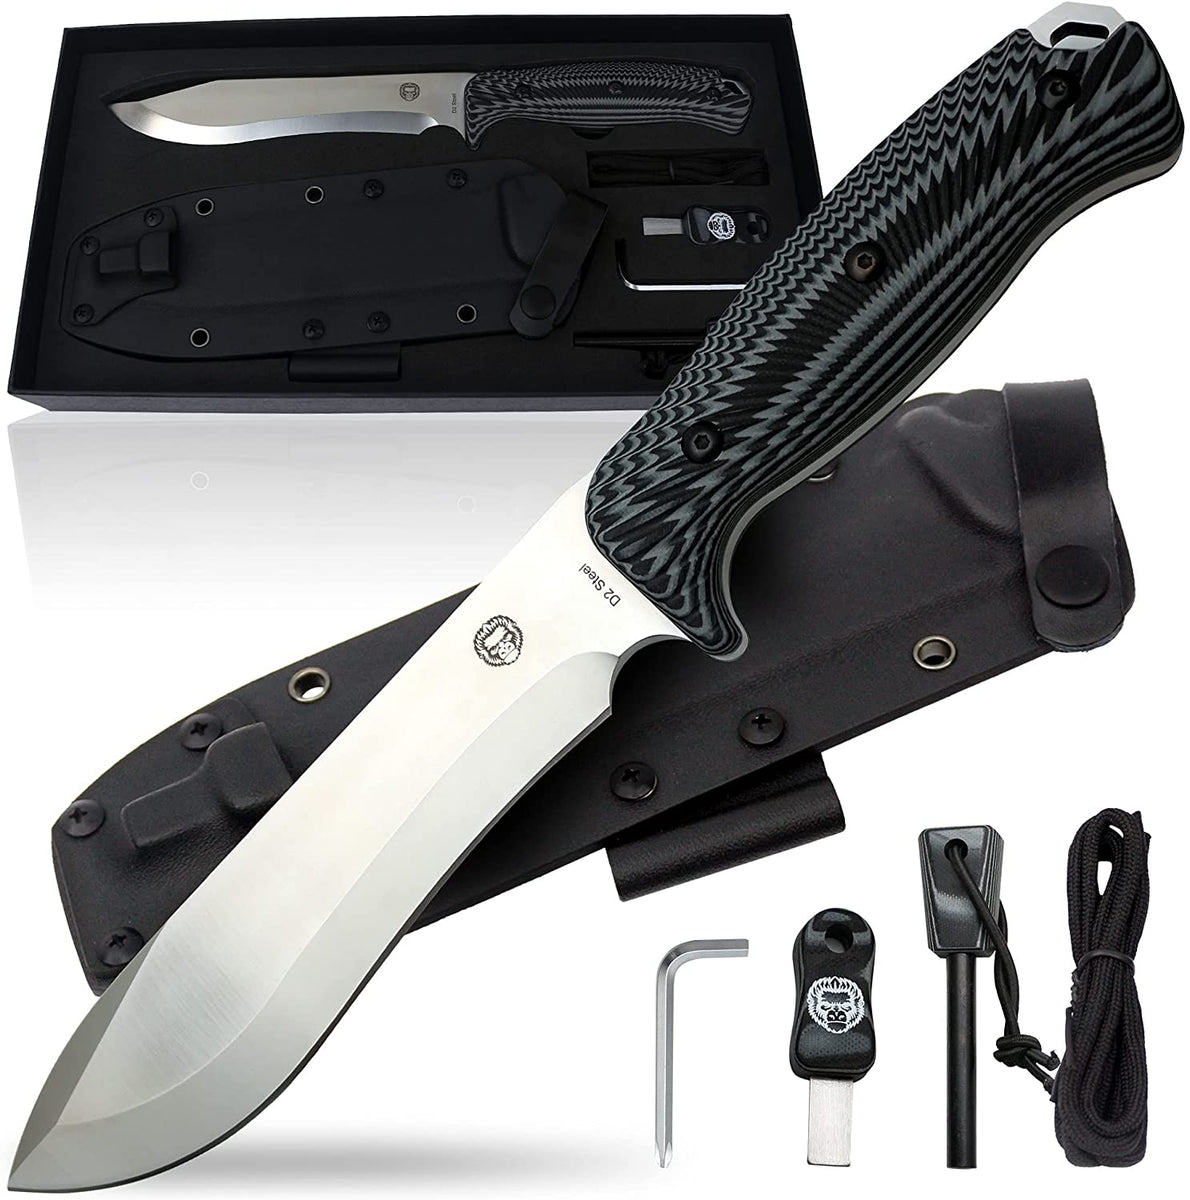 Survival for Holtzman\'s $150 – SHIPPING Knife Survival FREE 1095 Large Gorilla orders |